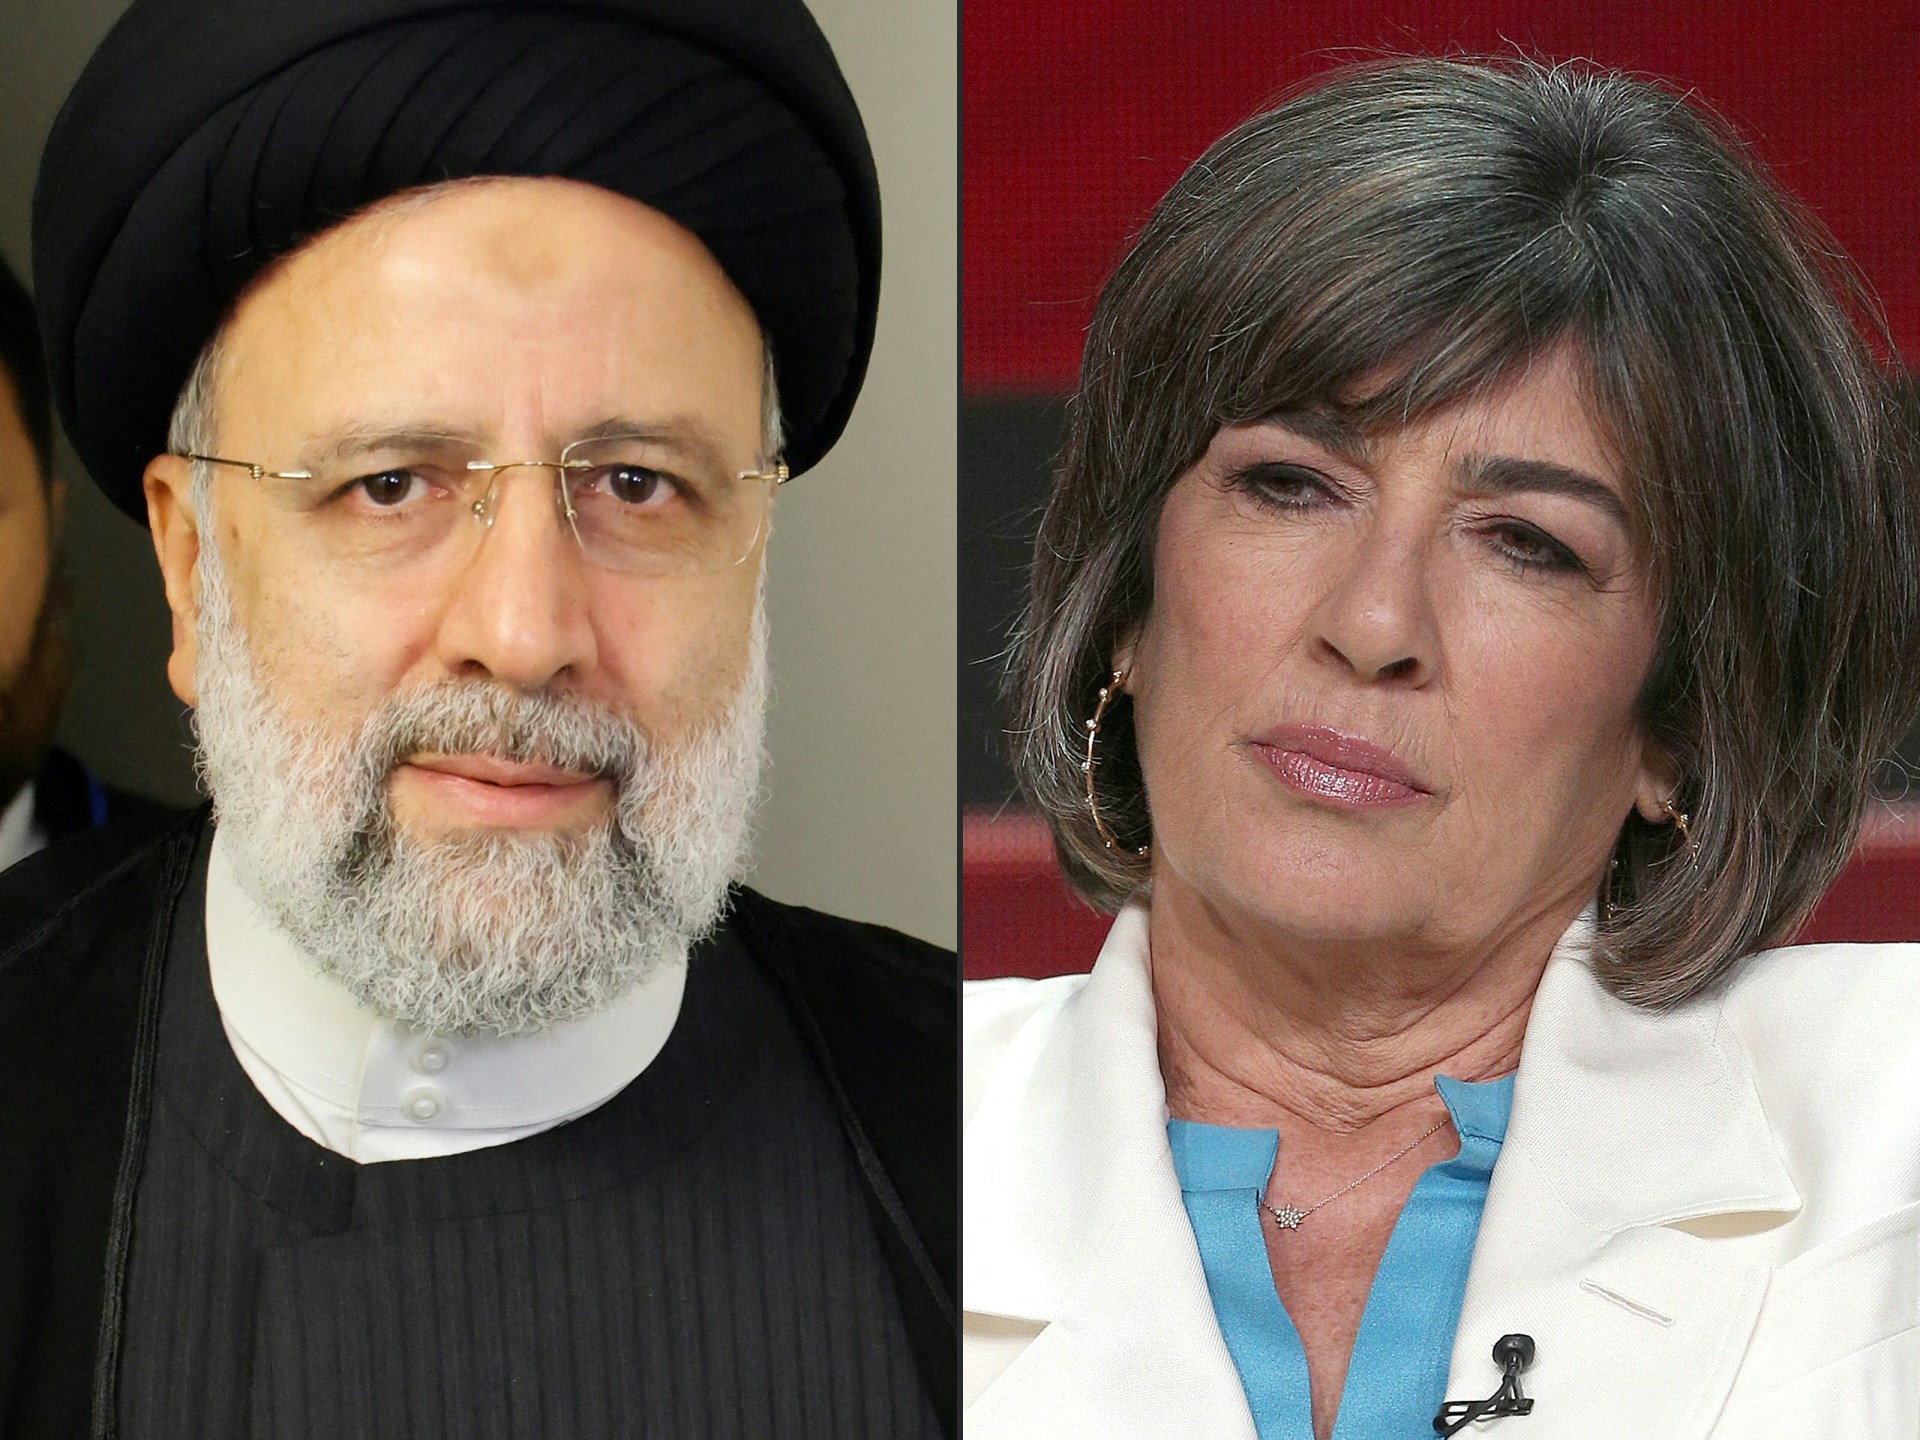 iran-leader-cancels-interview-with-cnn-s-amanpour-over-headscarf